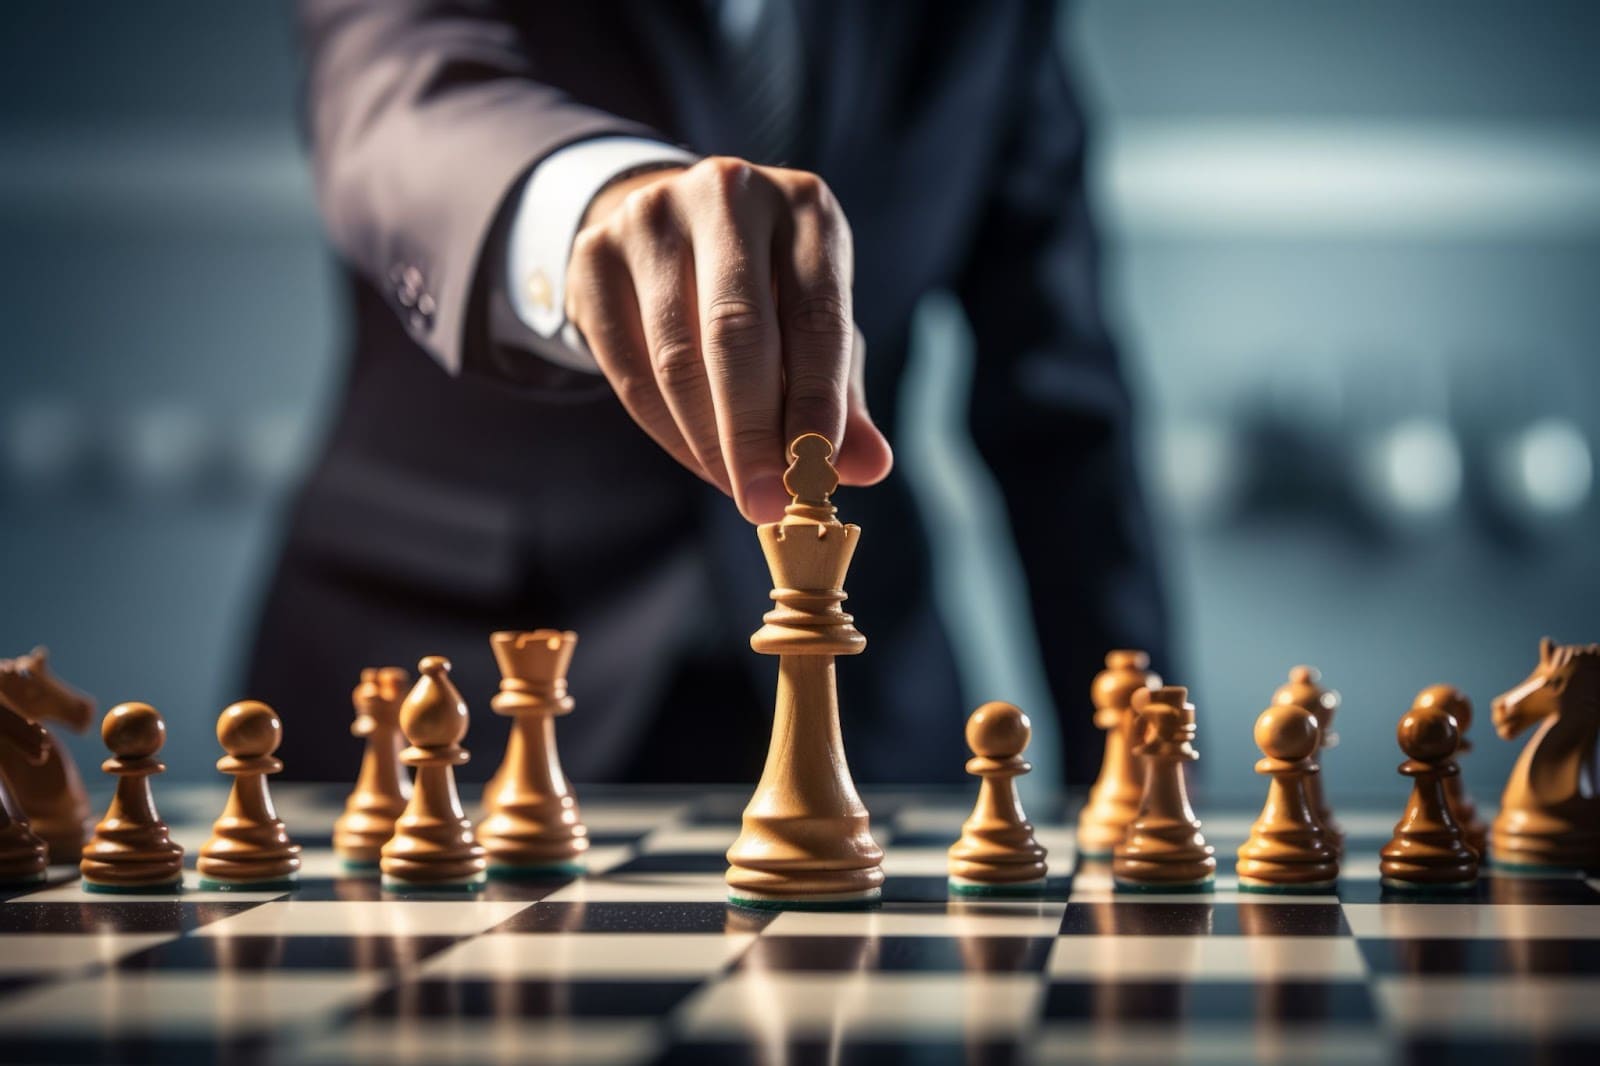 Businessman strategically moving a chess piece, symbolizing the calculated decisions of high net worth investors focused on building and preserving wealth through diversified investments and long-term planning.